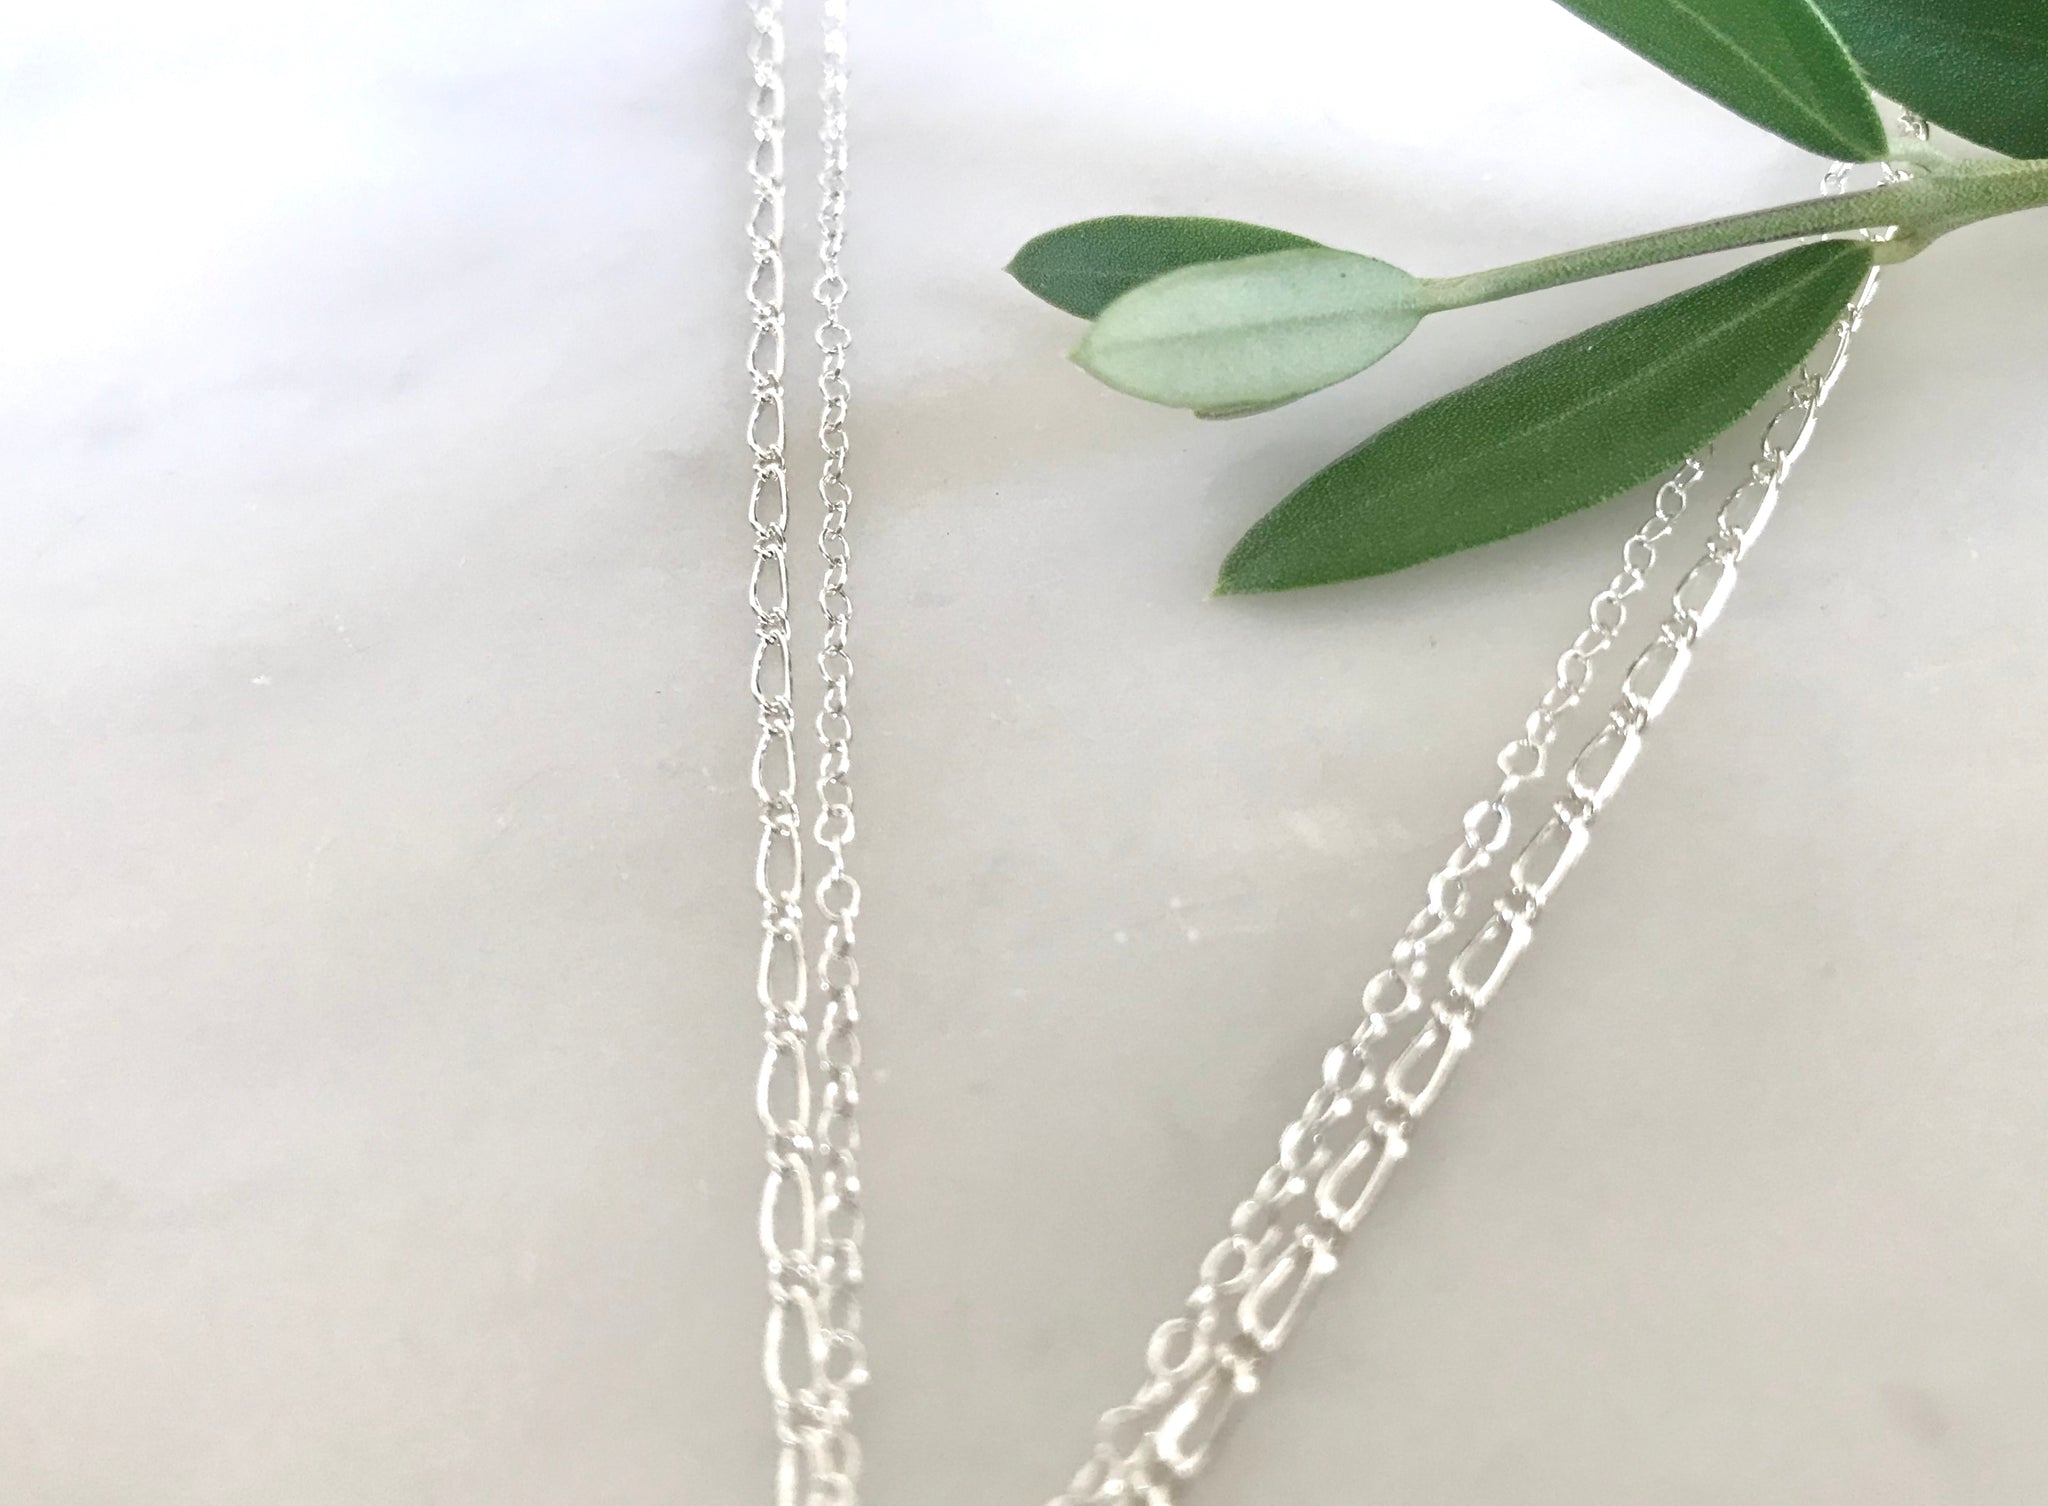 Chain Necklace 18"(46cm) Sterling Silver 925 / チェーン ネックレス 18"(46cm)スターリング シルバー925